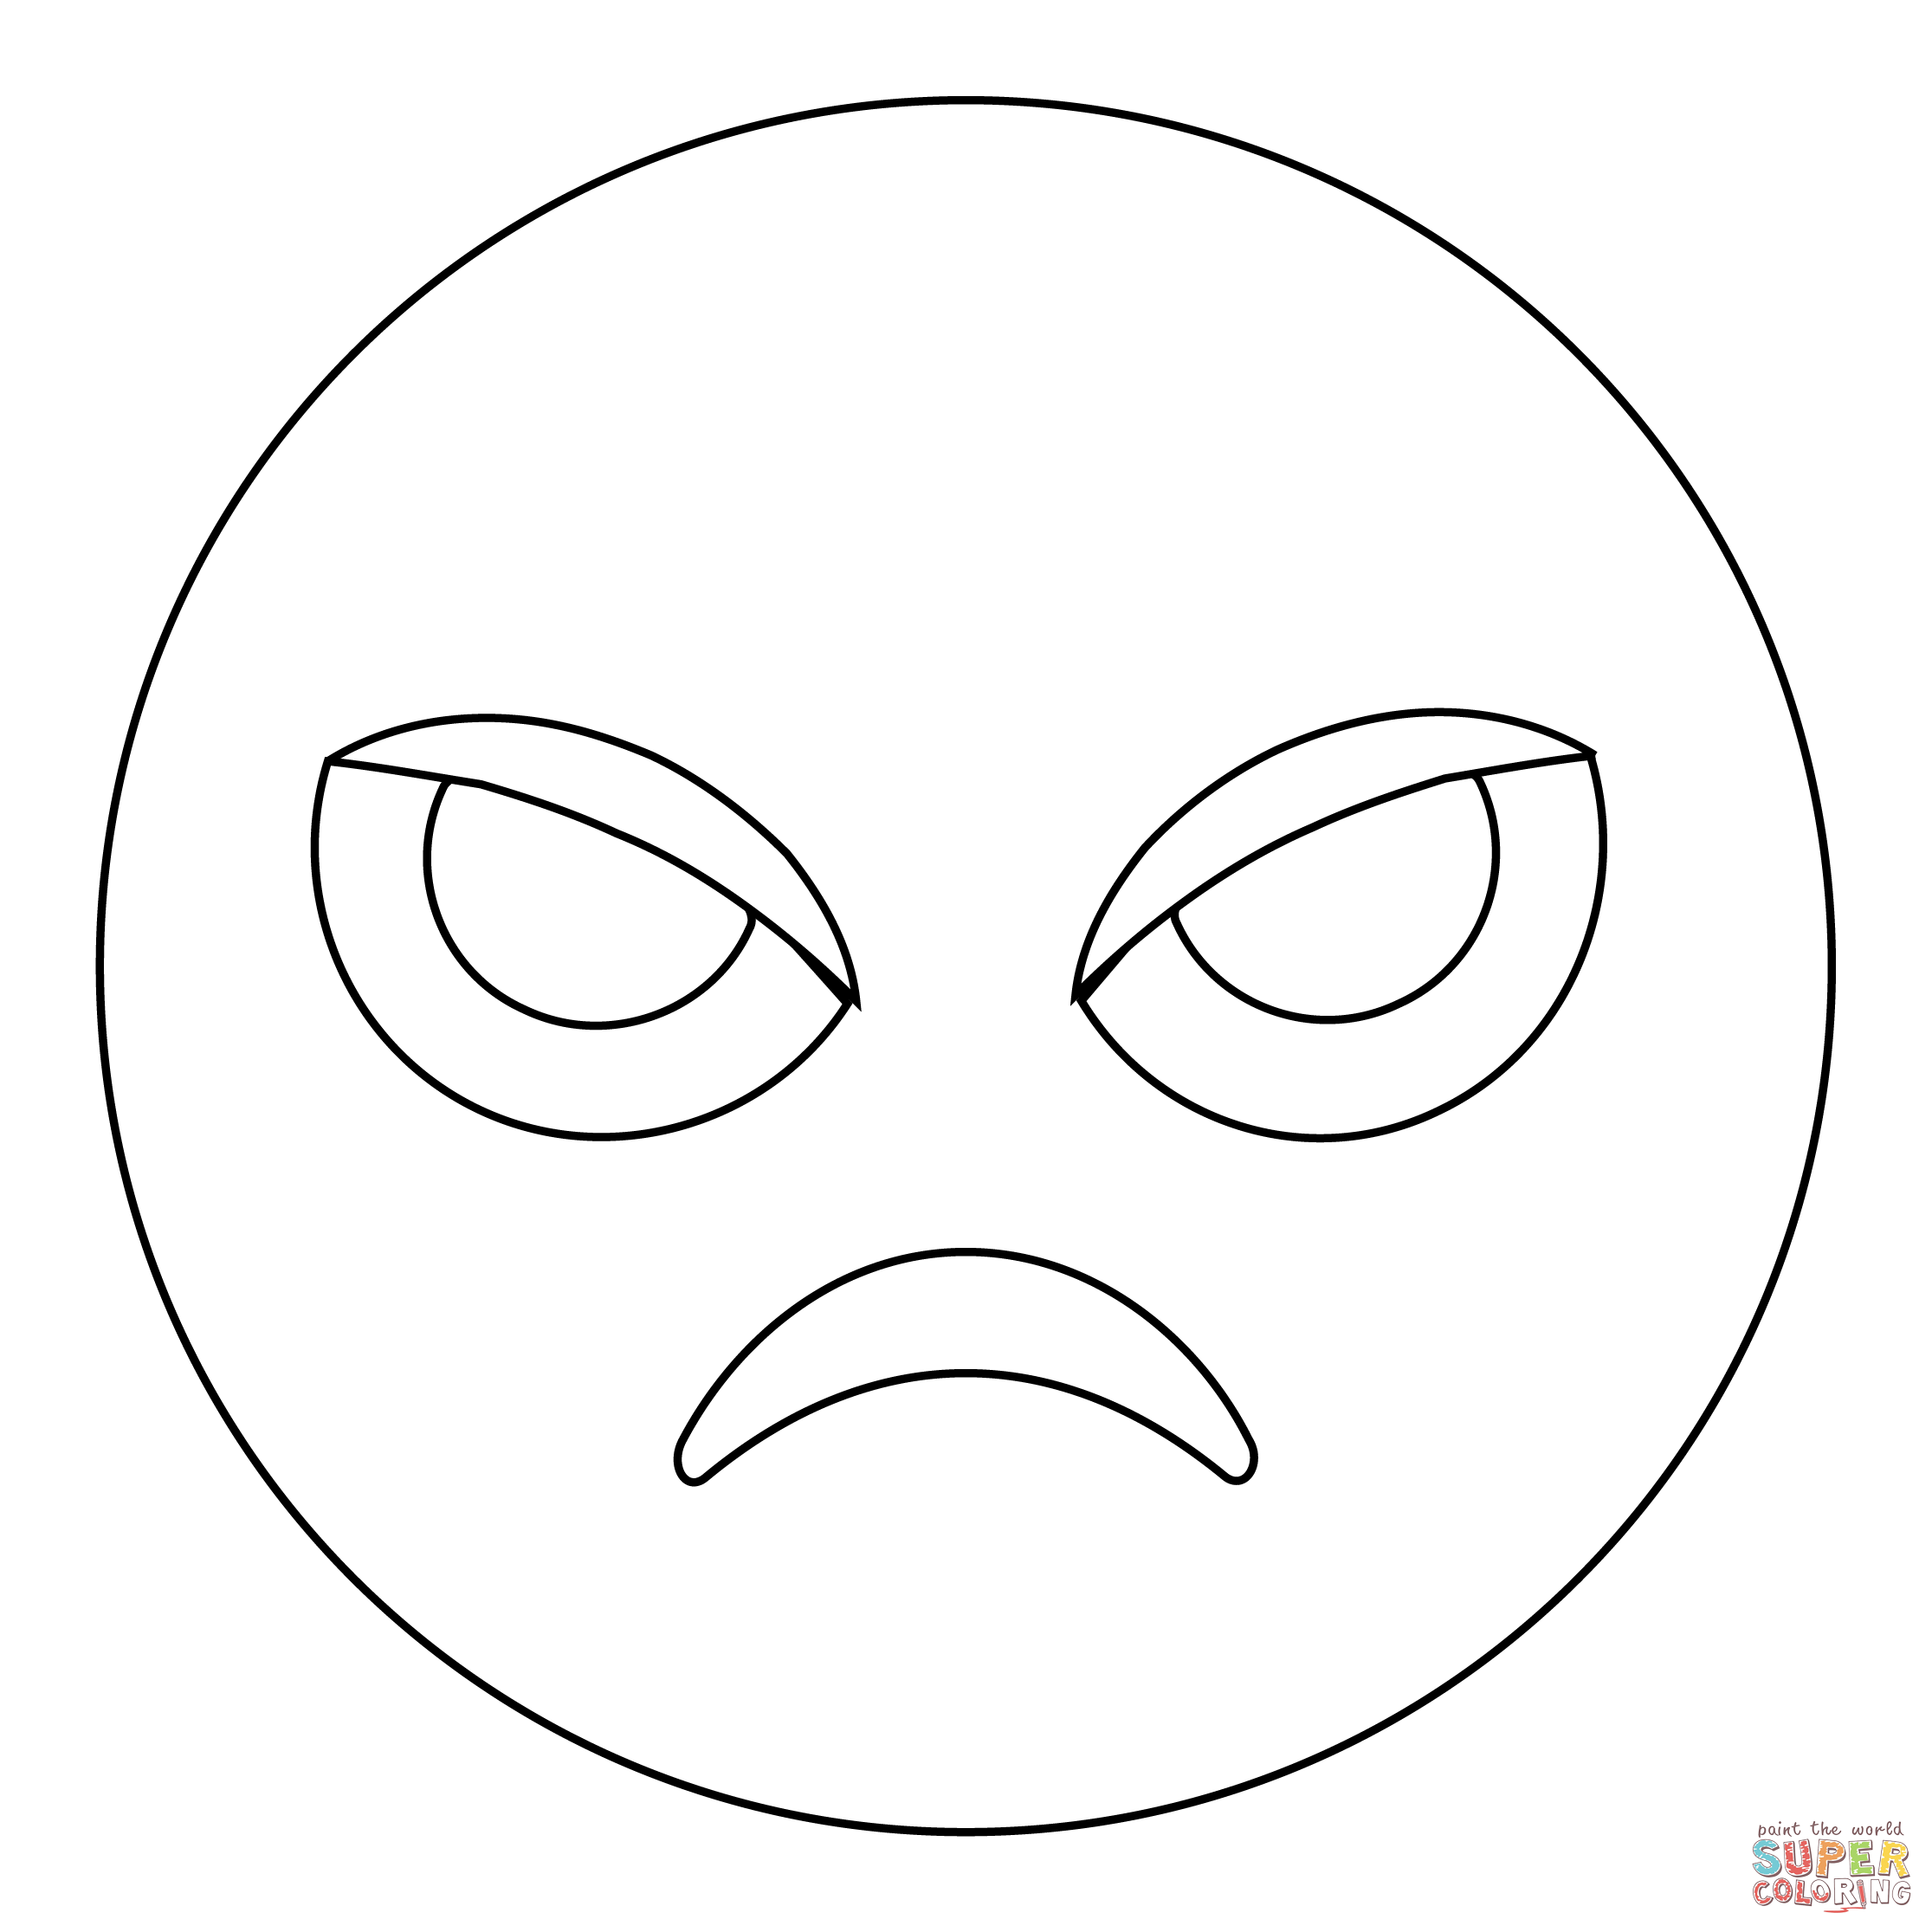 Angry Face coloring page | Free Printable Coloring Pages